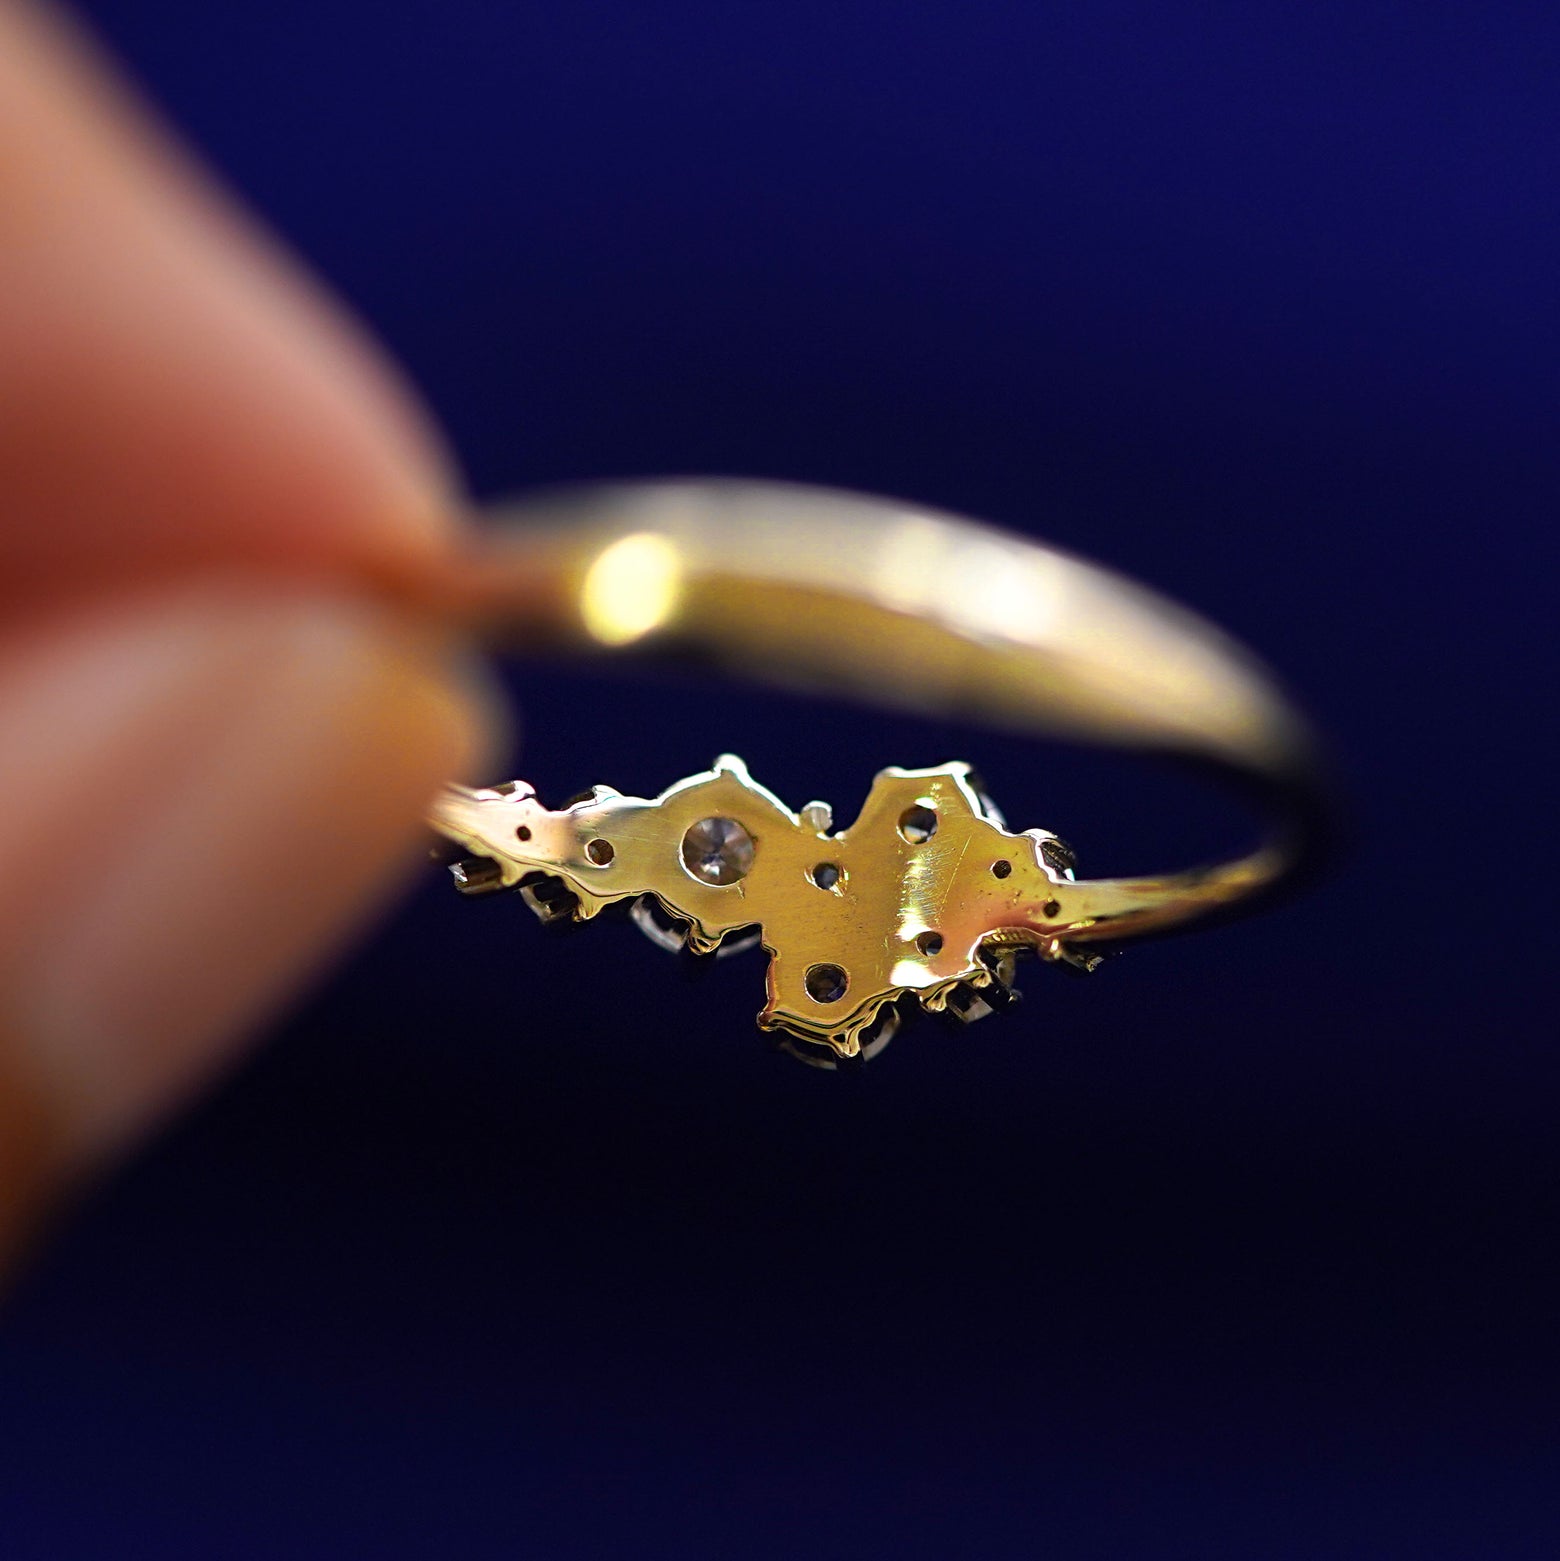 Underside view of a solid 14k gold Diamond Cluster Ring